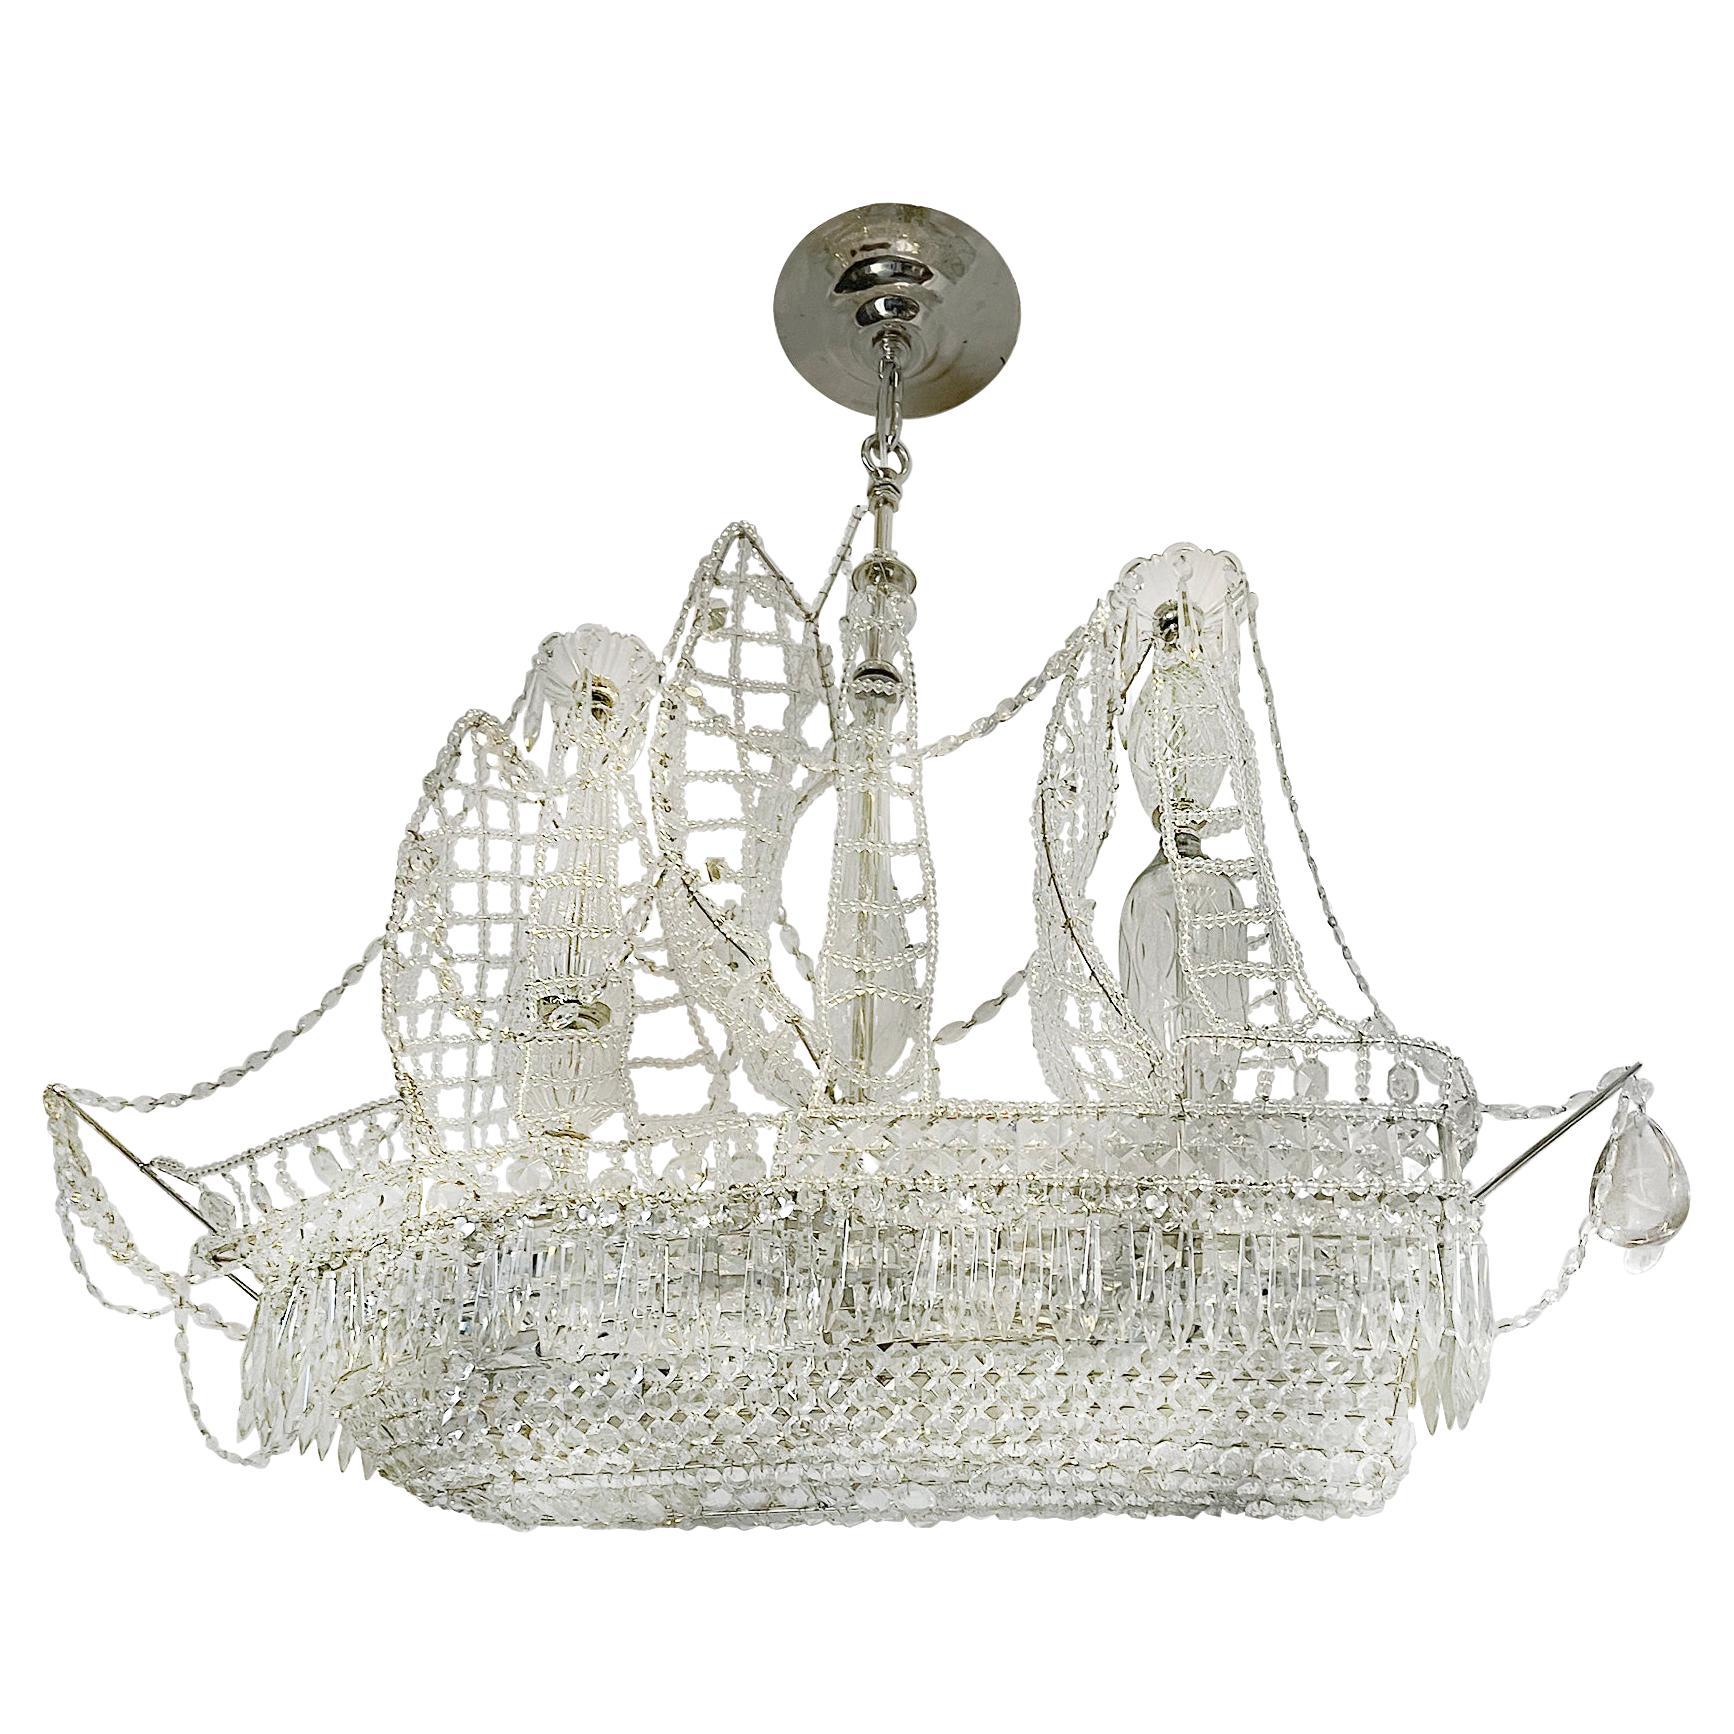 Ship-Shaped Crystal Chandelier For Sale